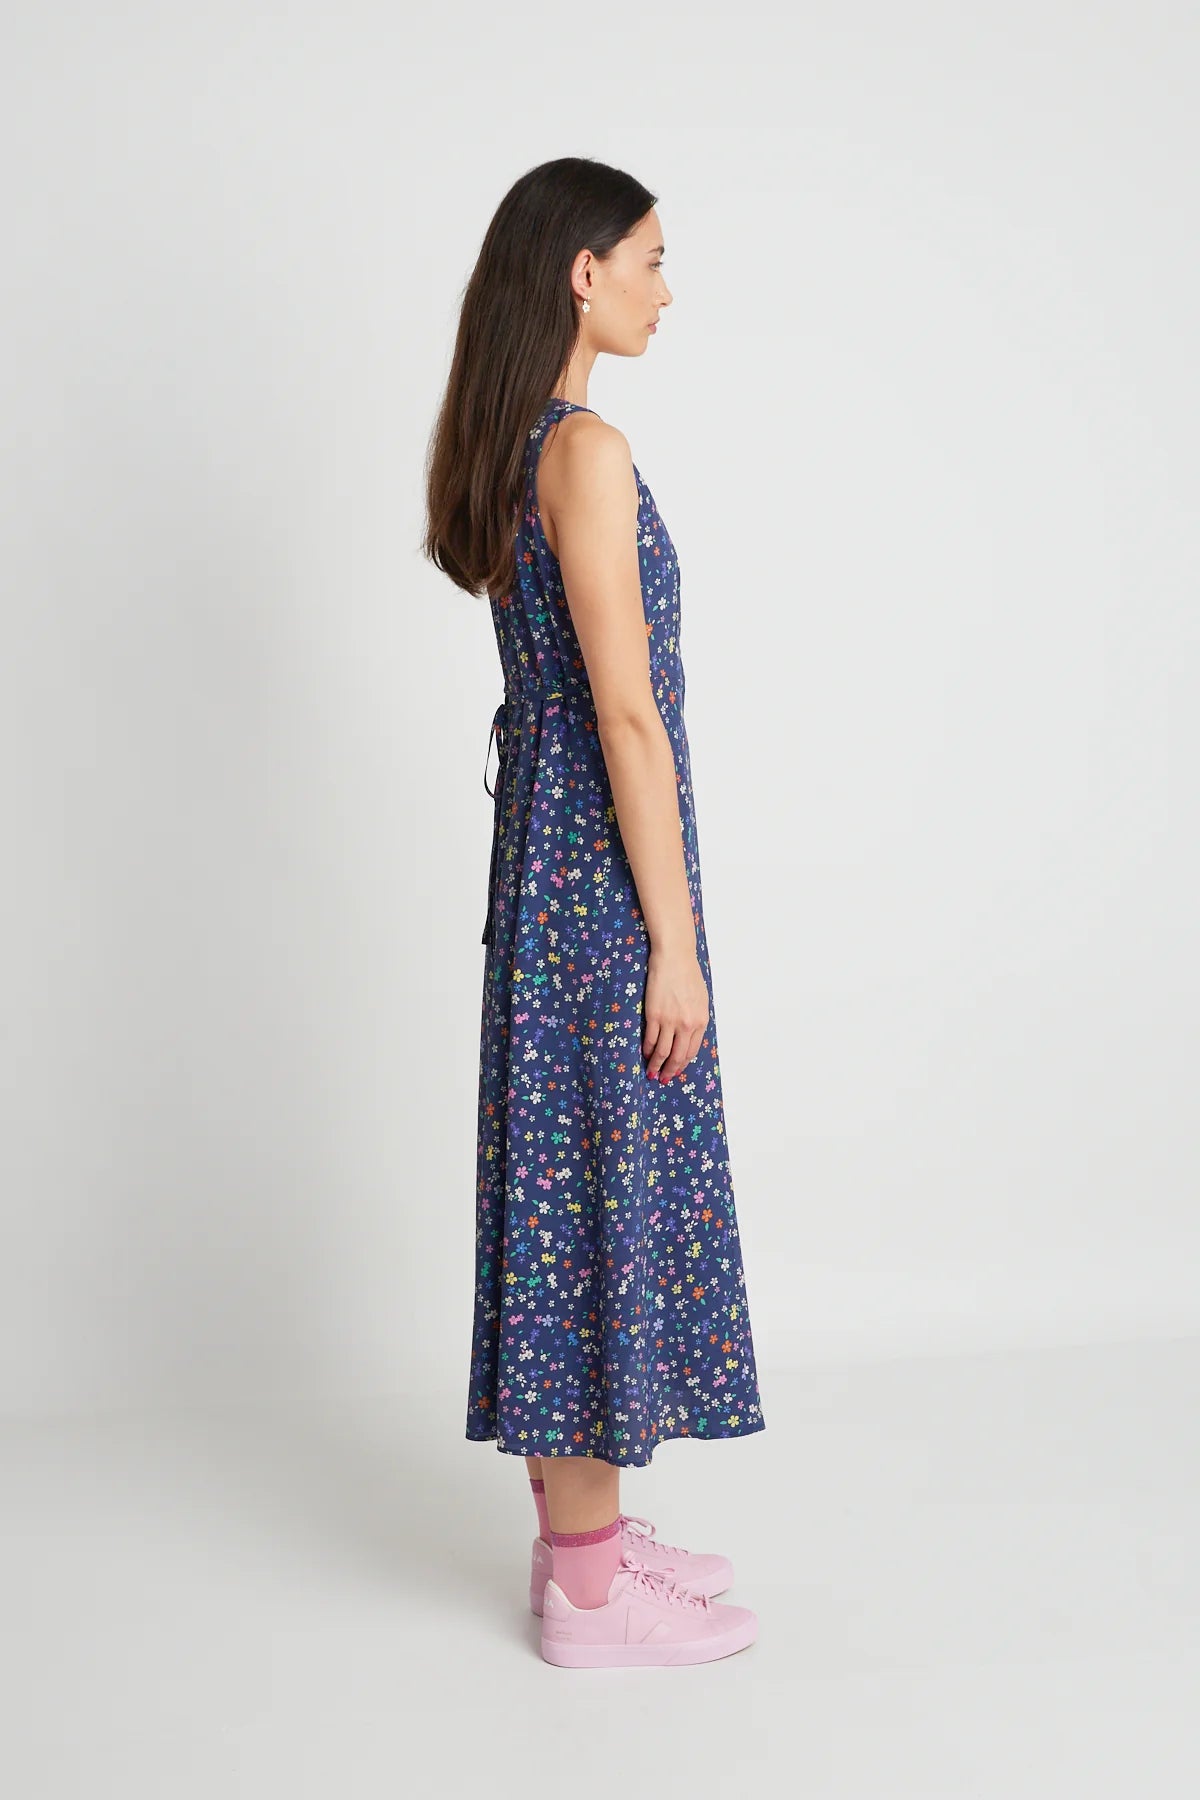 twenty-seven names | Love and Happiness Dress | Navy Meadow | Palm Boutique